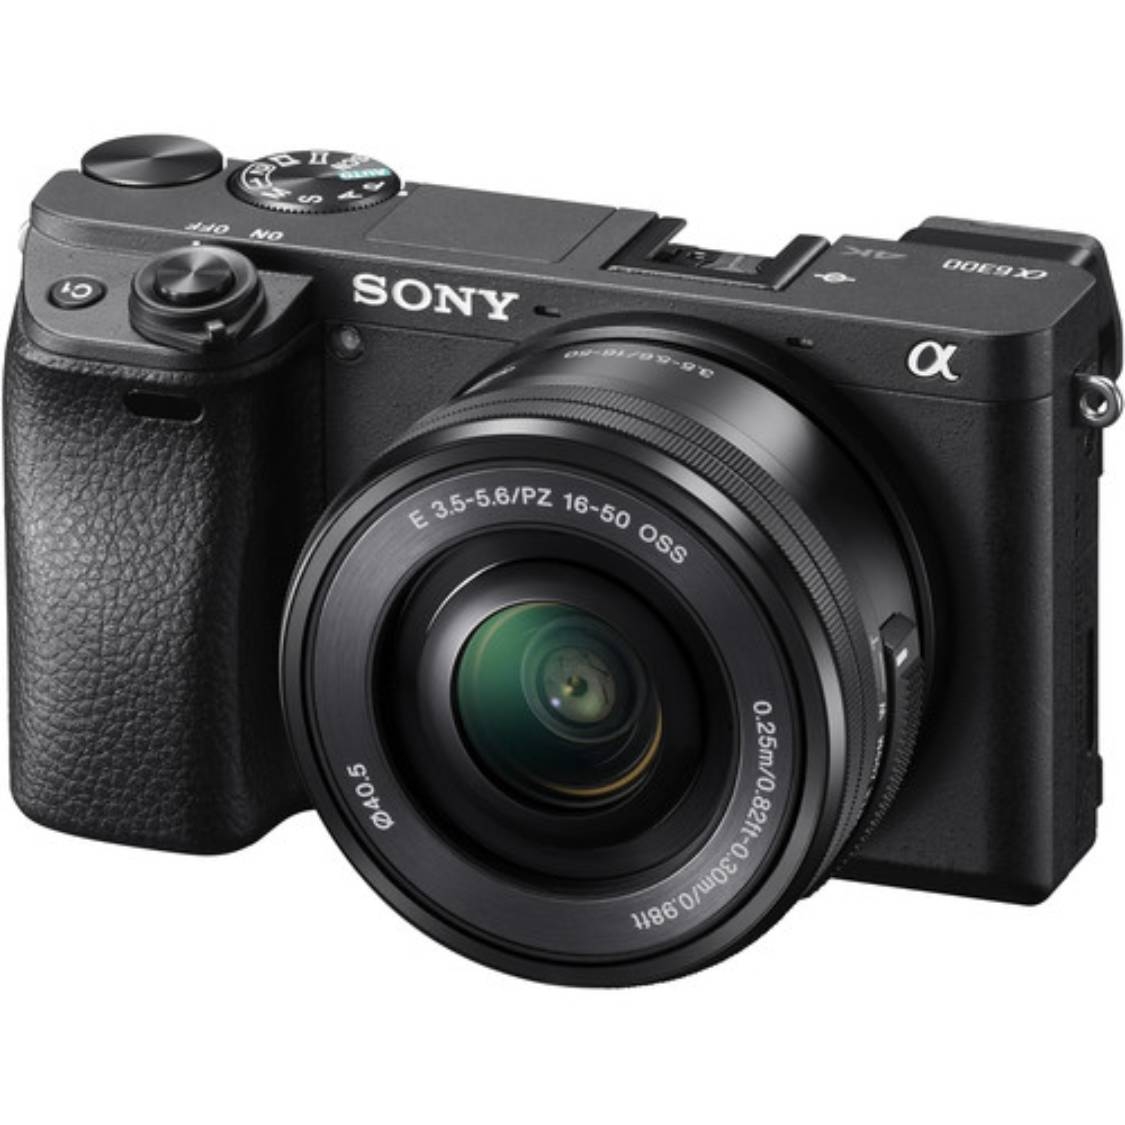 Sony A6300 Camera with 16-50mm Lens (black) - Open Box